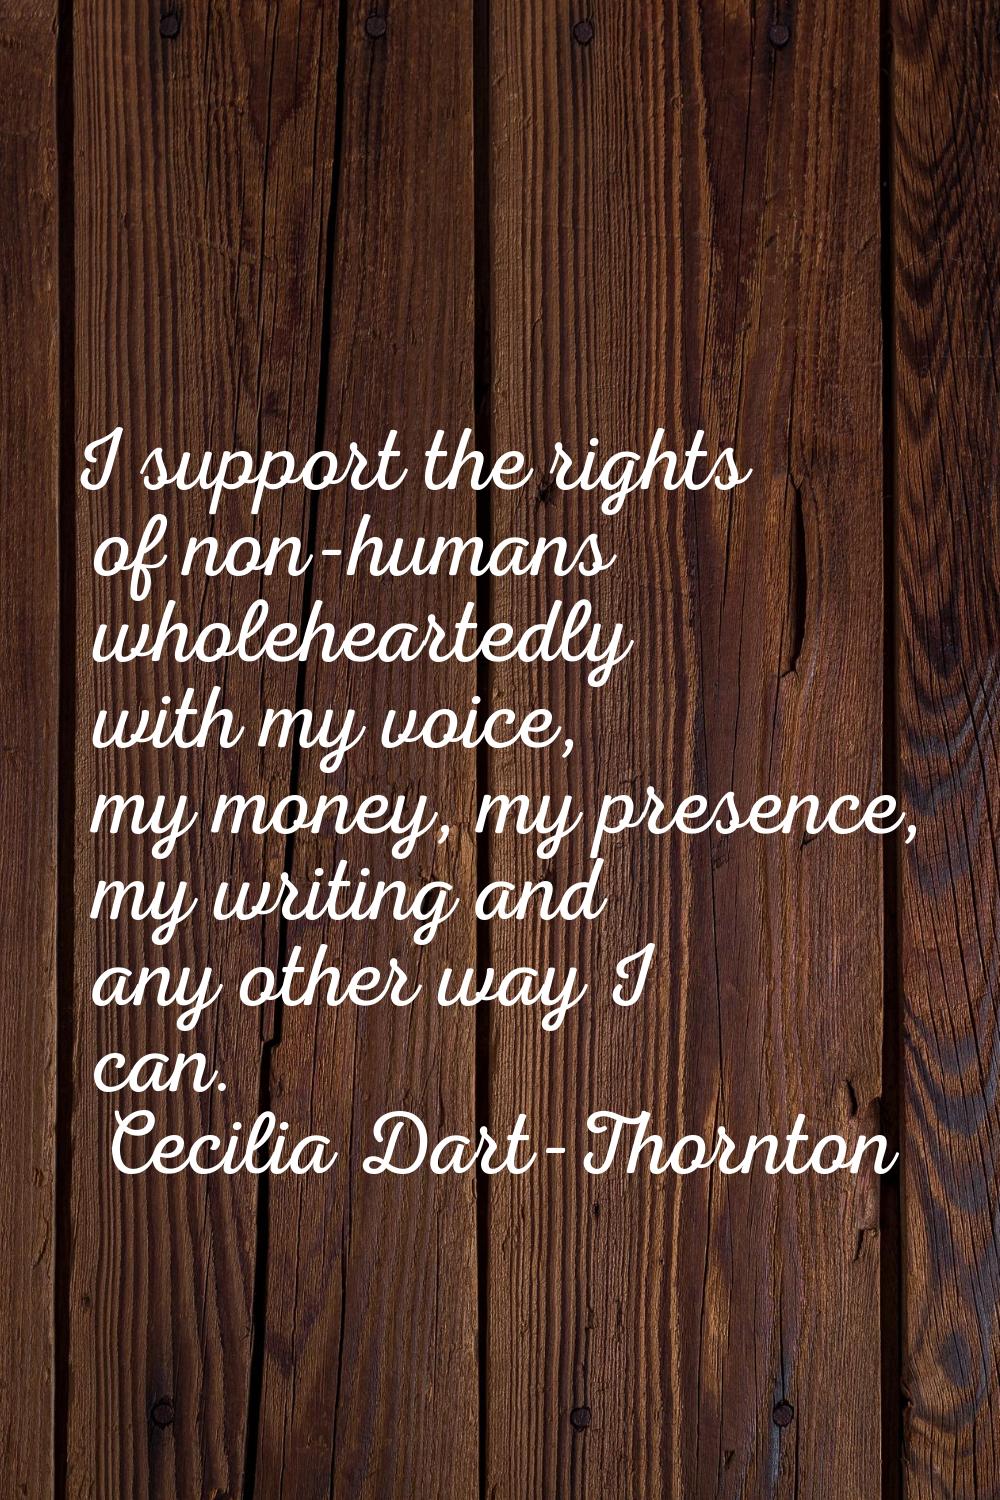 I support the rights of non-humans wholeheartedly with my voice, my money, my presence, my writing 